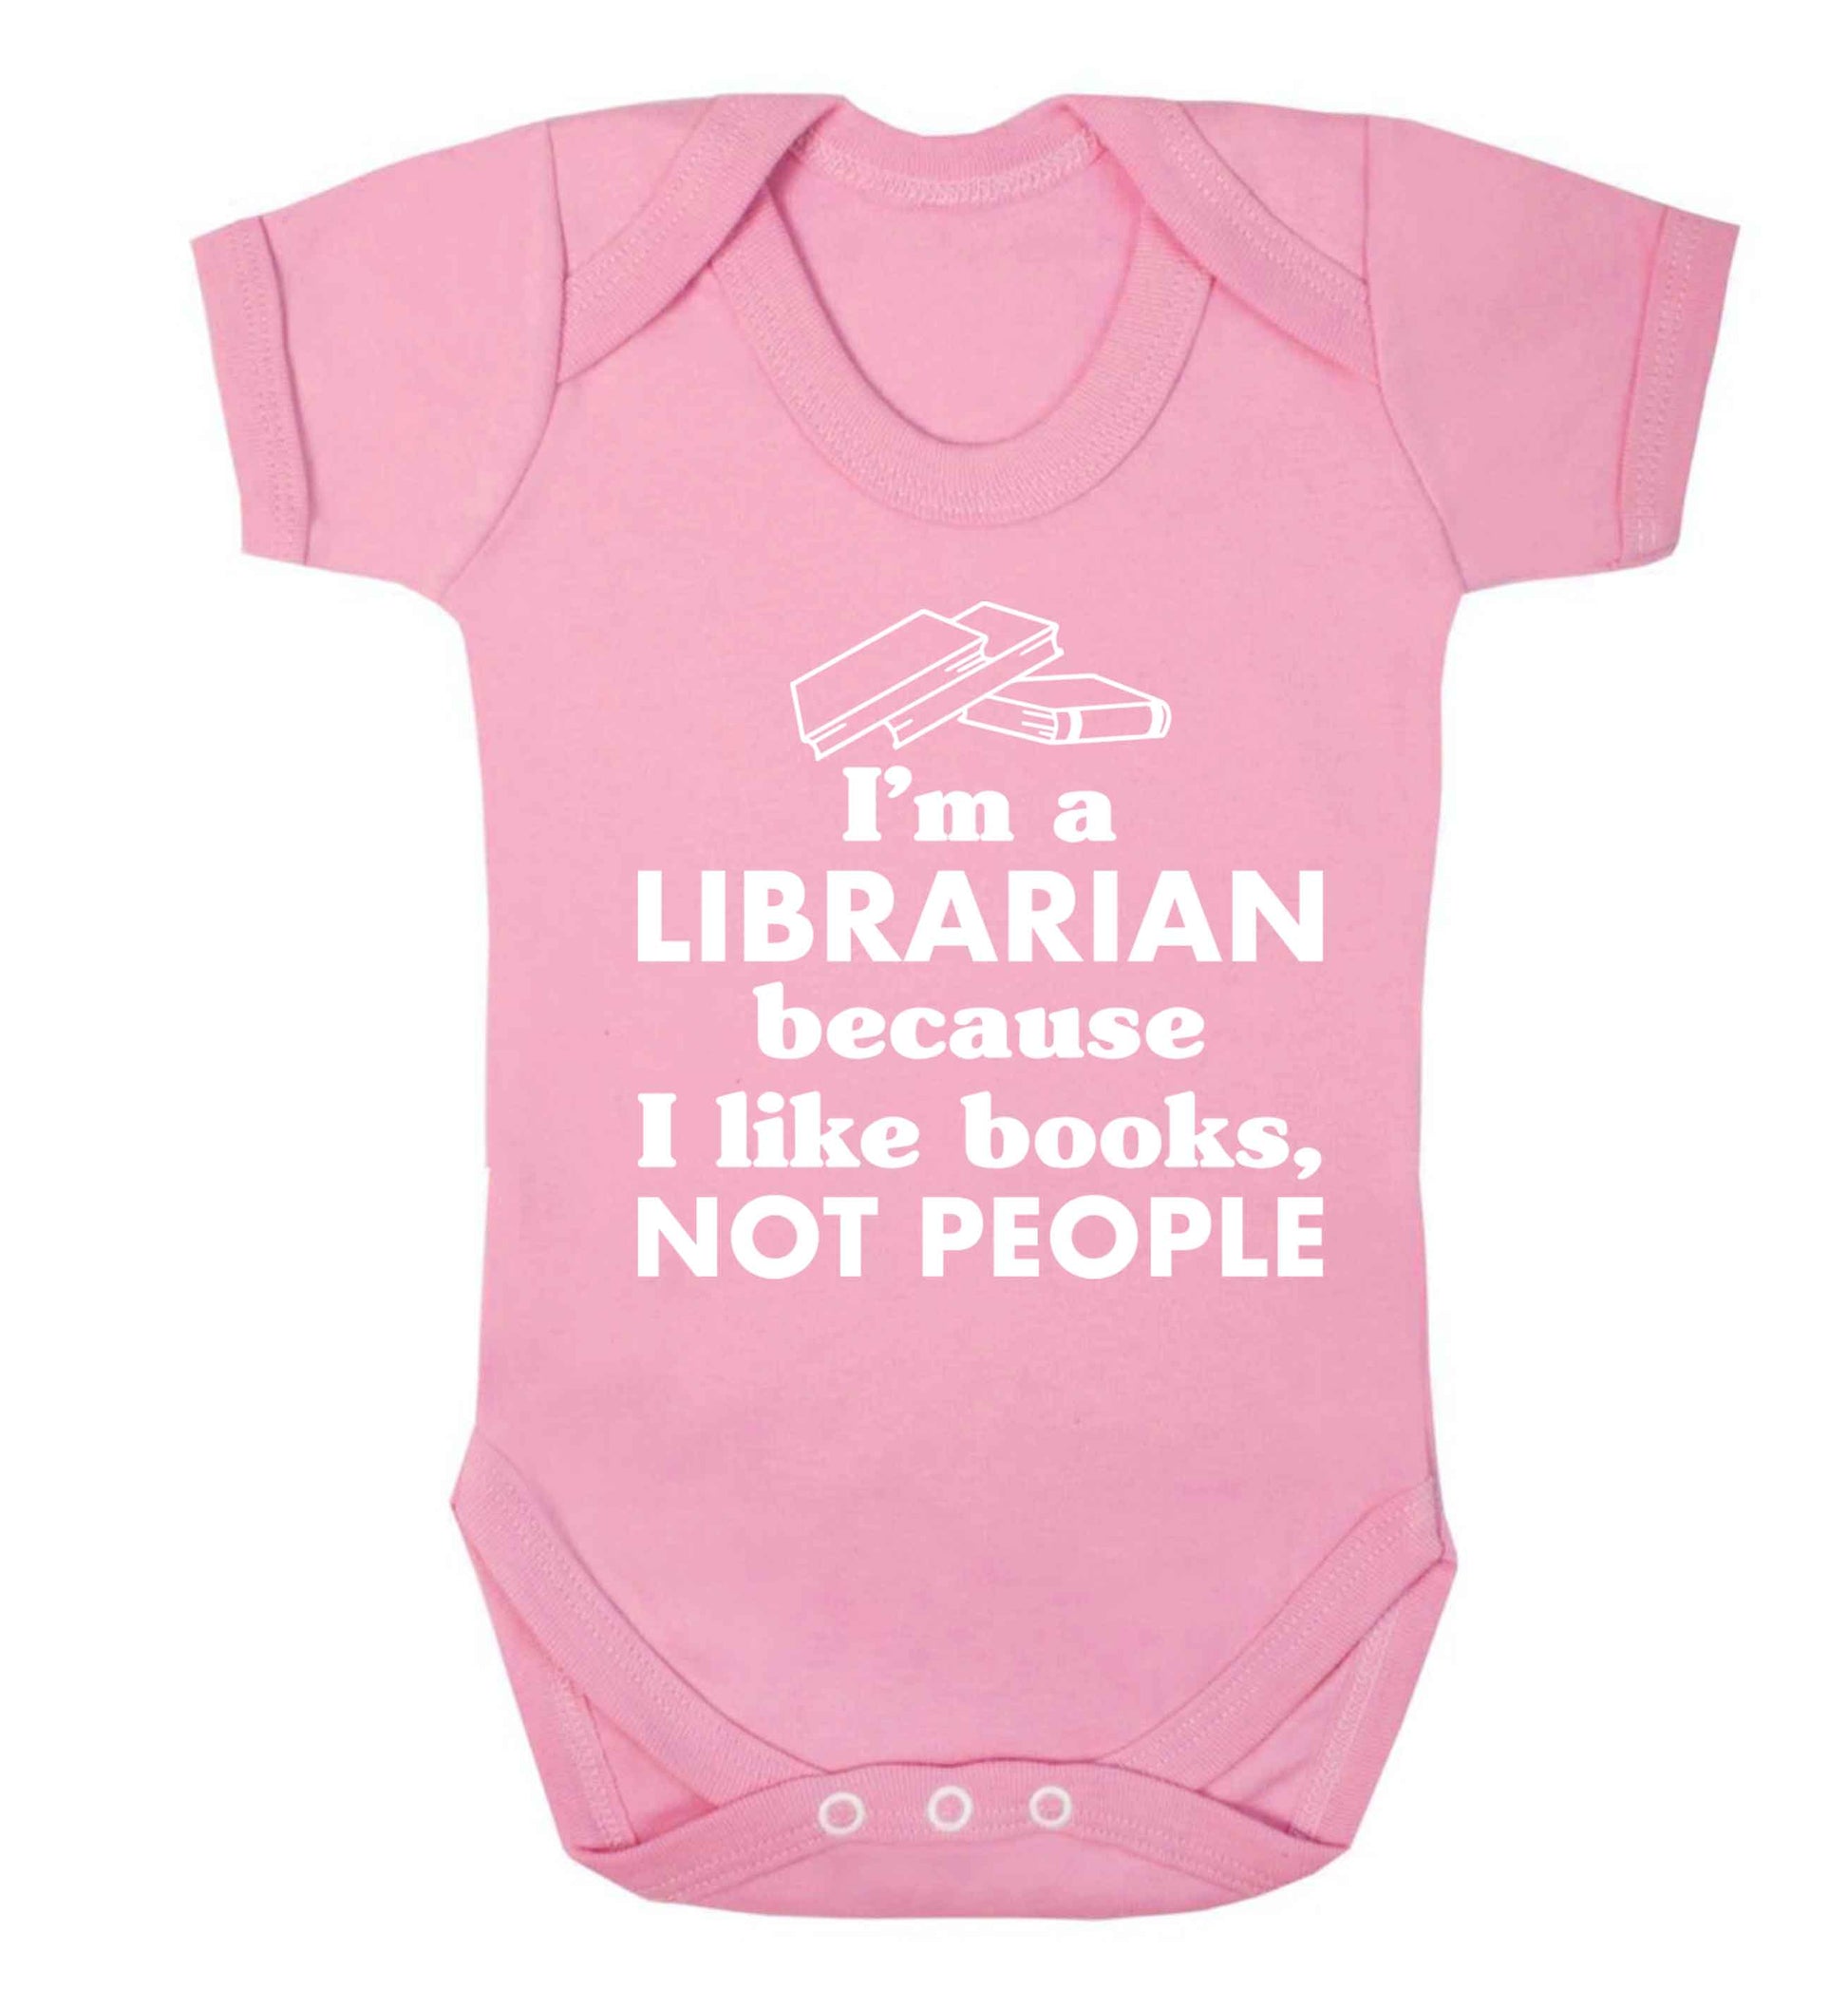 I'm a librarian because I like books not people Baby Vest pale pink 18-24 months